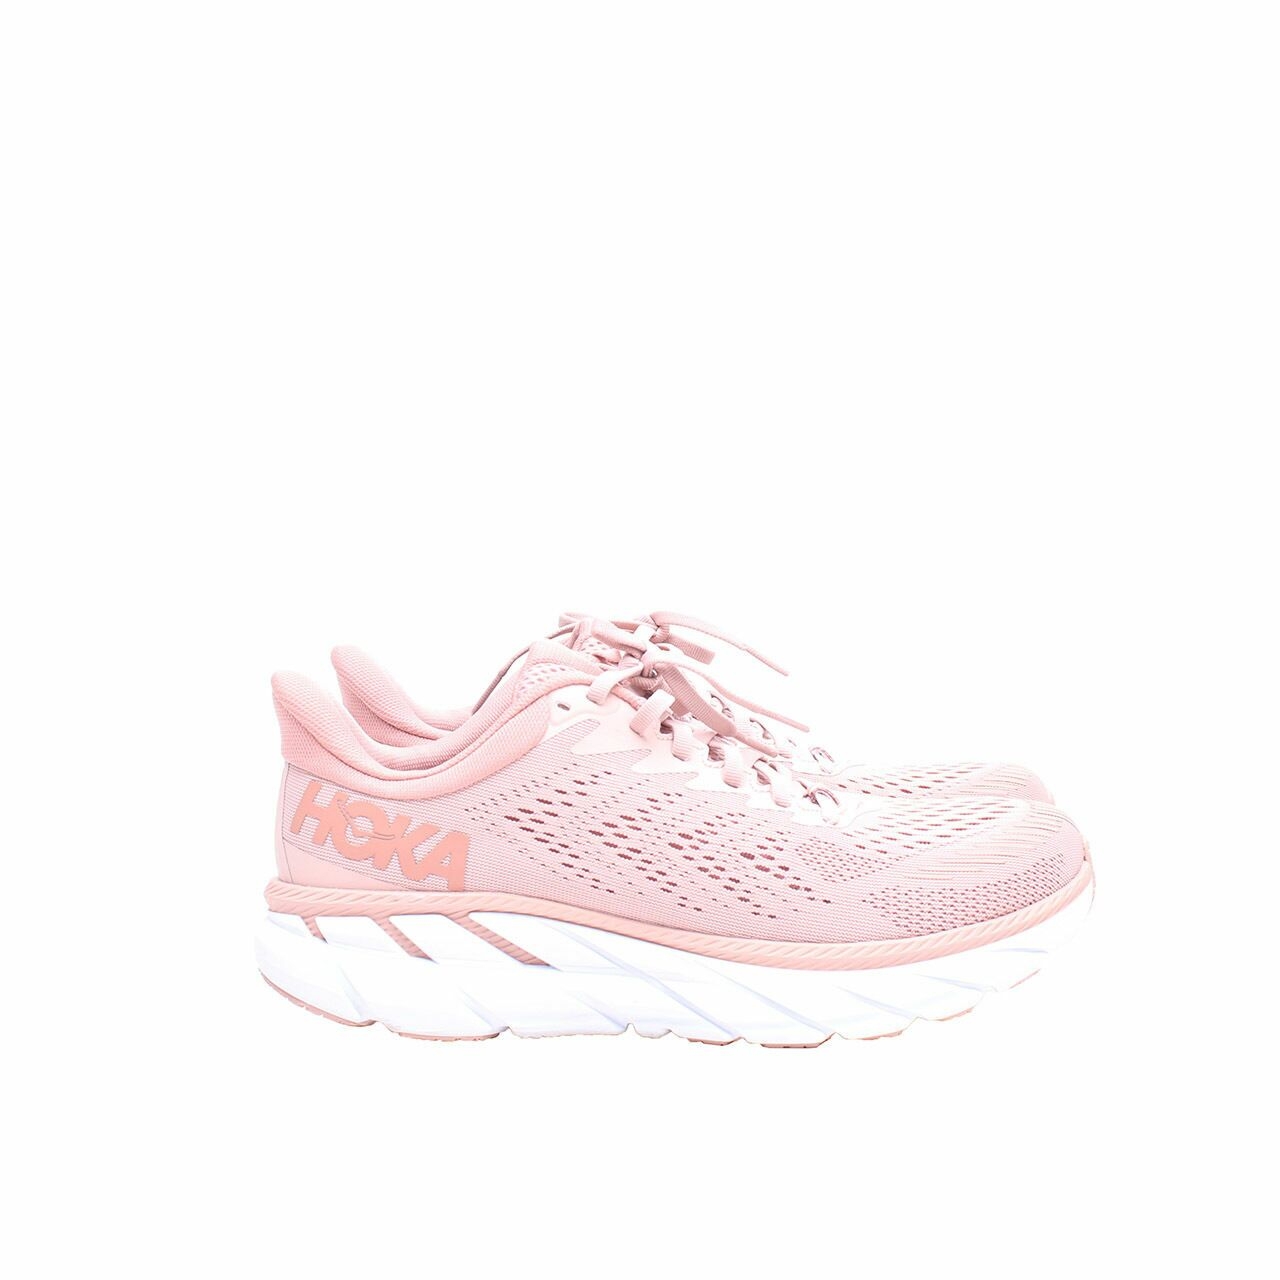 Hoka One one Pink Rose Clifton 7 Women's Running Shoes Sneakers